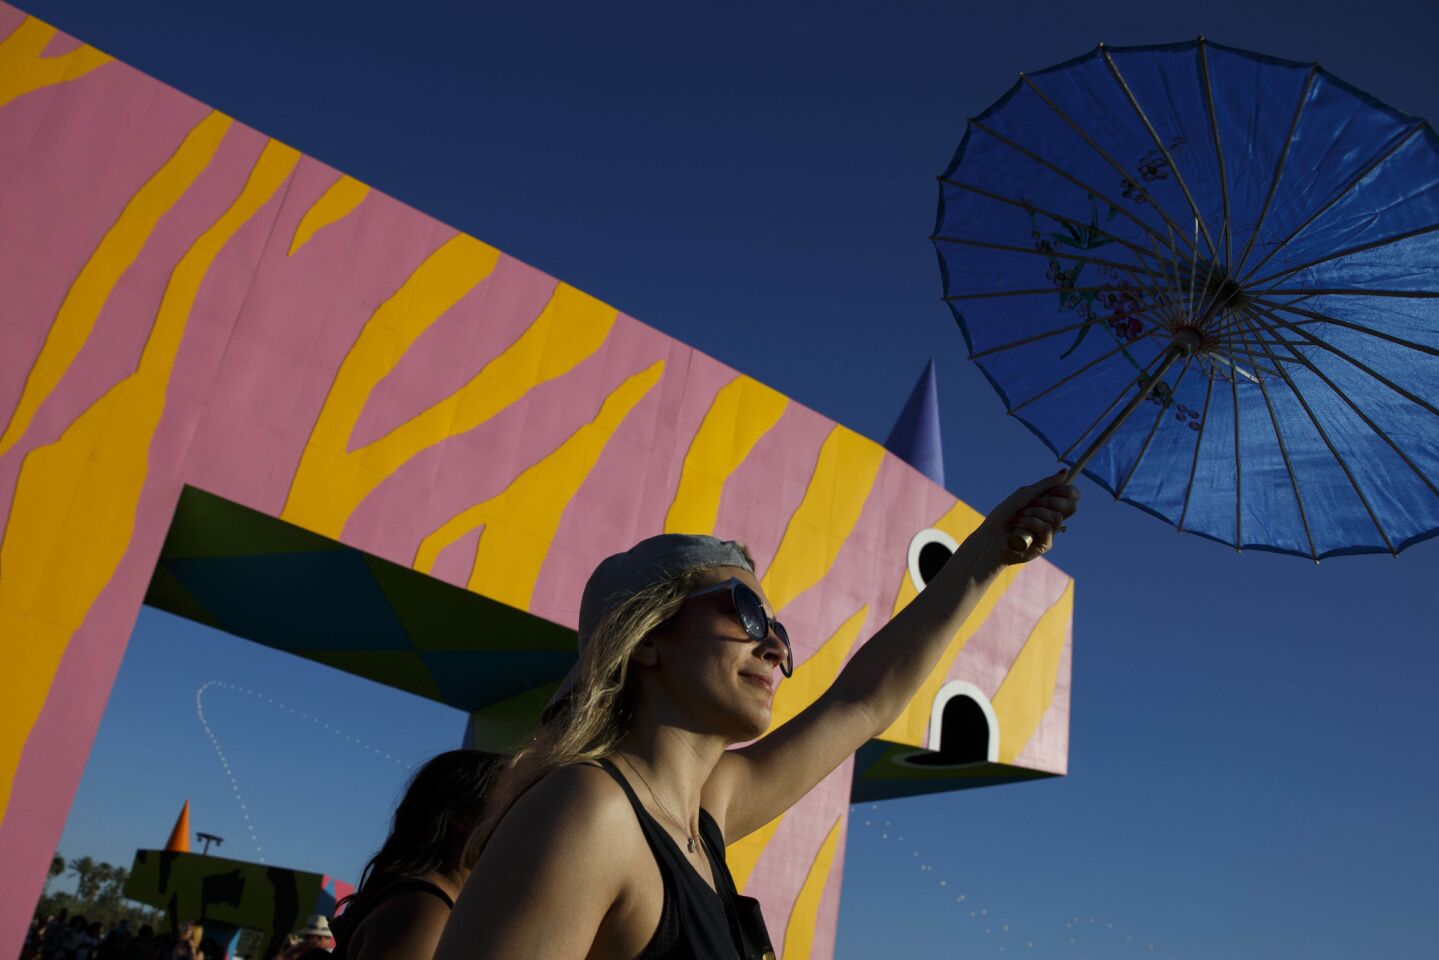 An attendee carries an umbrella while walking past the art project "is this what brings things into focus?" by Joanne Tatham and Tom O'Sullivan, during weekend one of the three-day Coachella Valley Music and Arts Festival at the Empire Polo Grounds on Friday, April 14, 2017 in Indio, Calif. (Patrick T. Fallon/ For The Los Angeles Times)